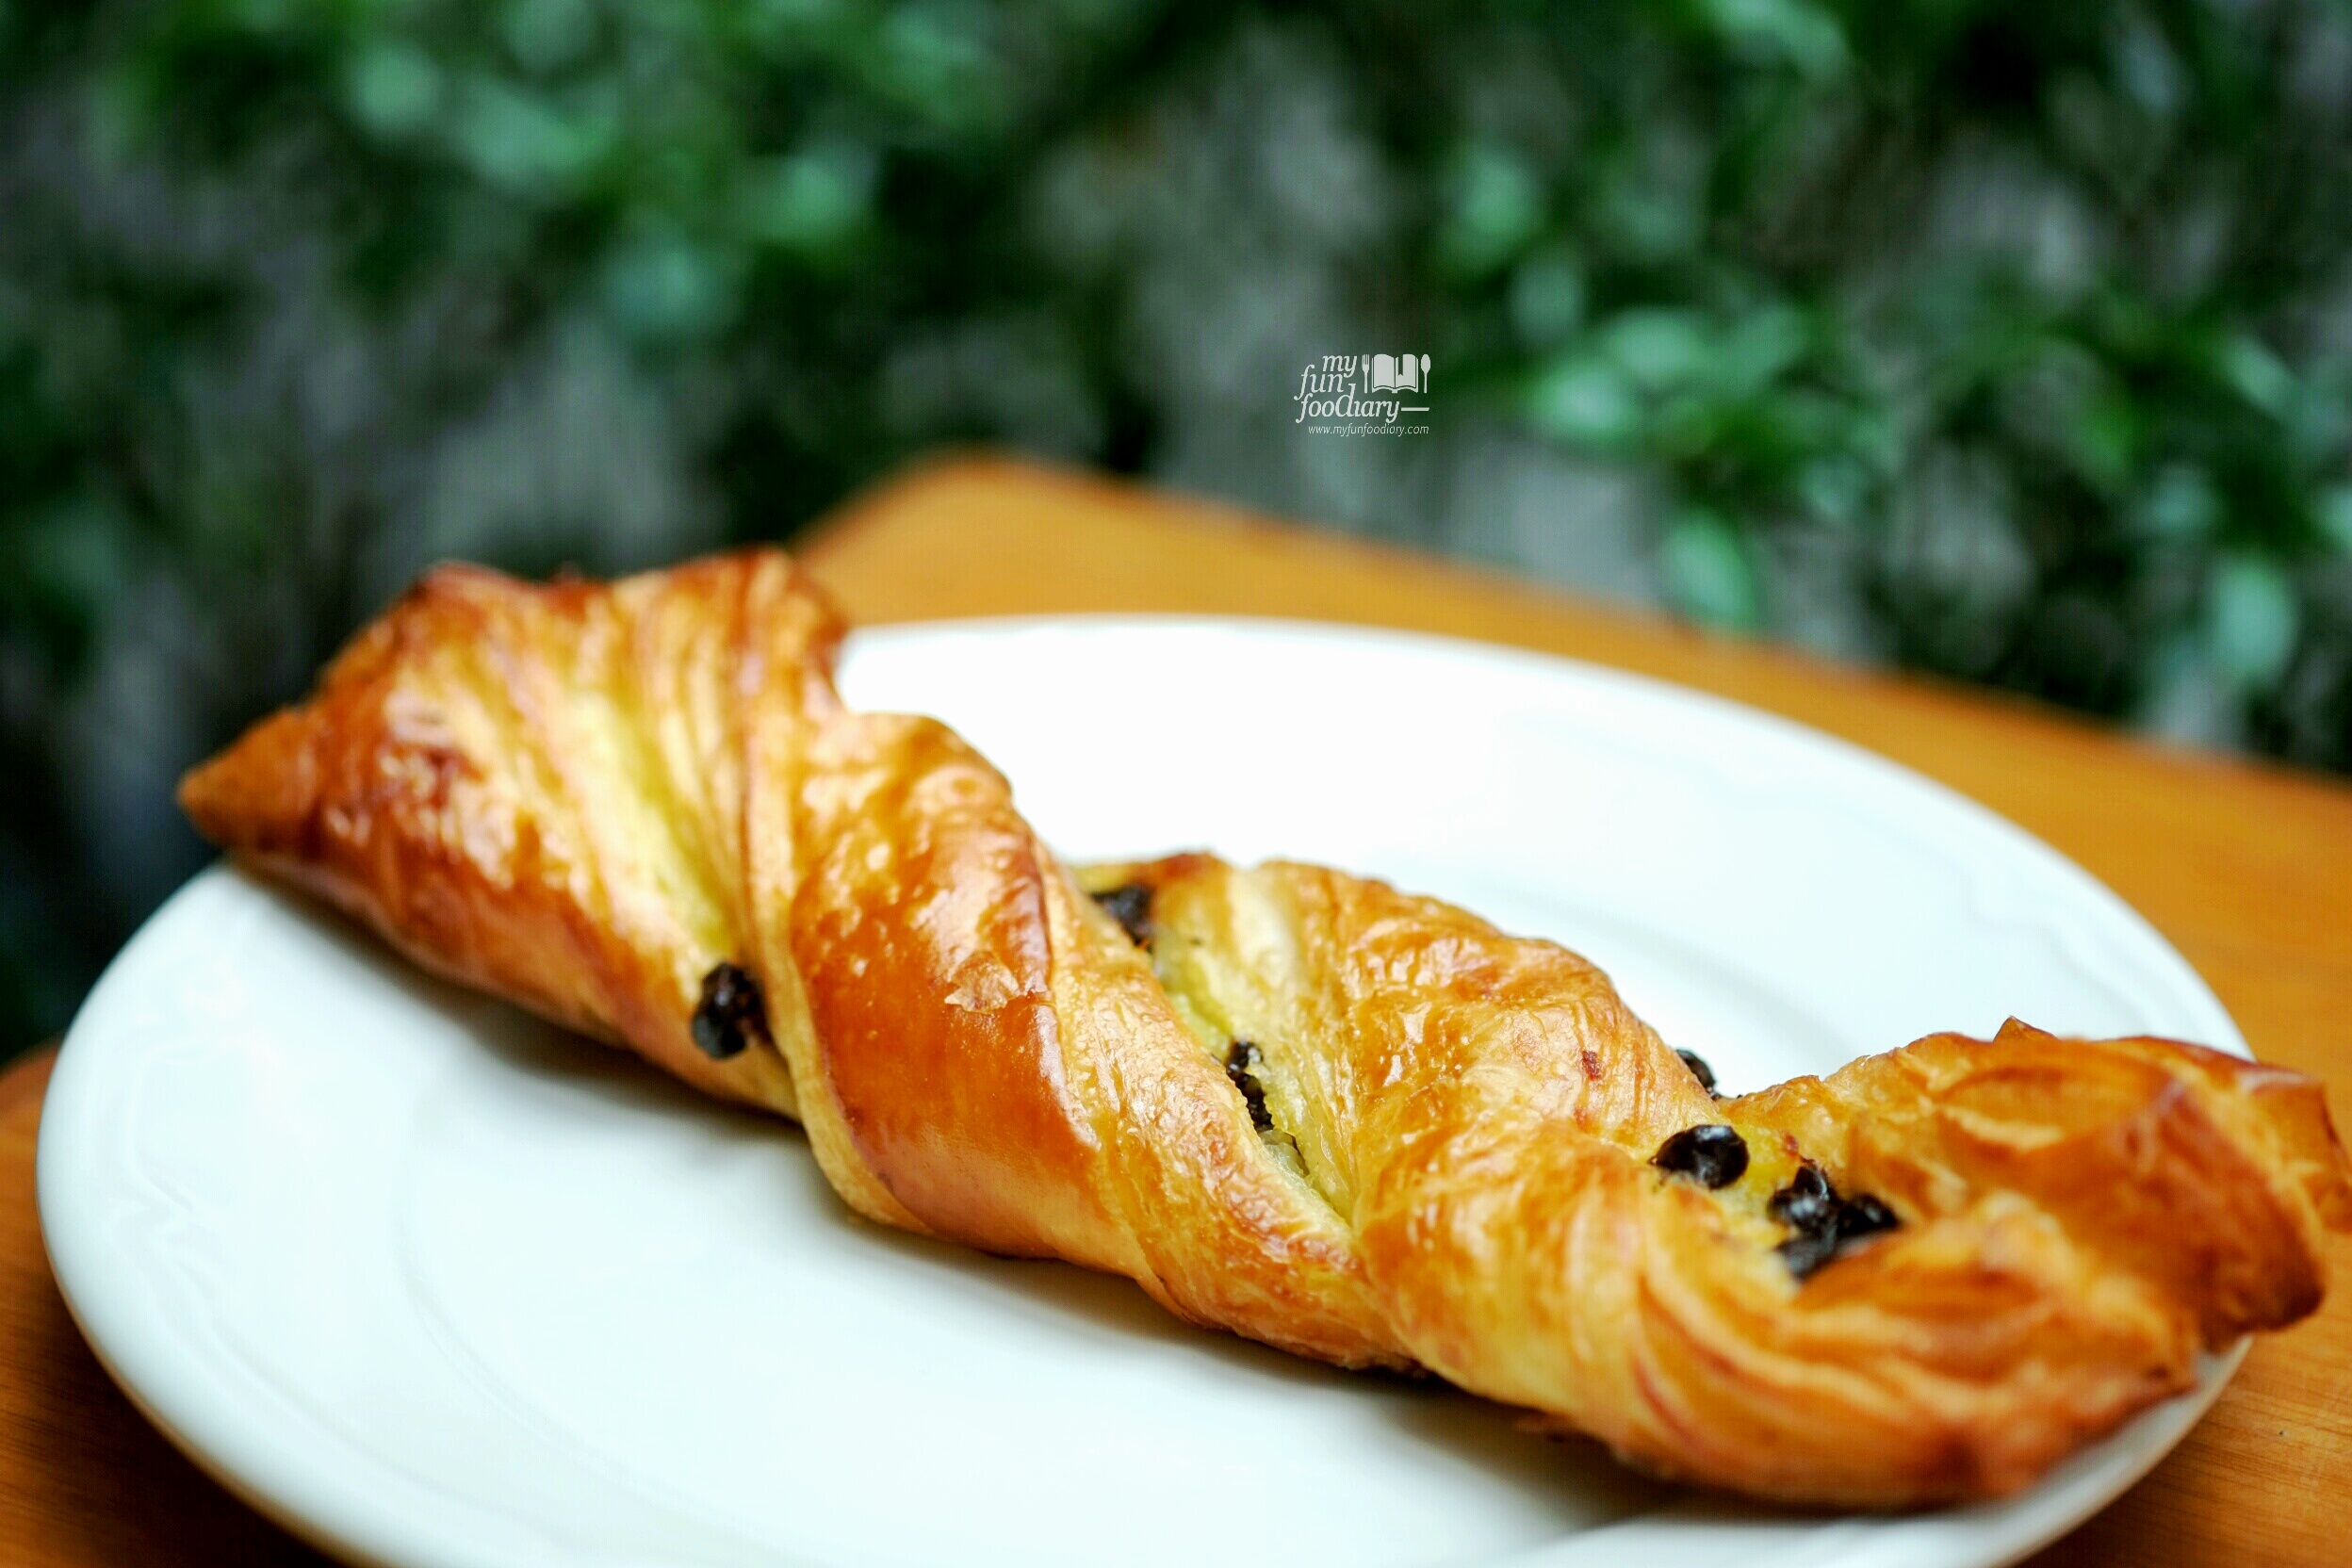 Le Gourmandise at PAUL French Bakery by Myfunfoodiary-